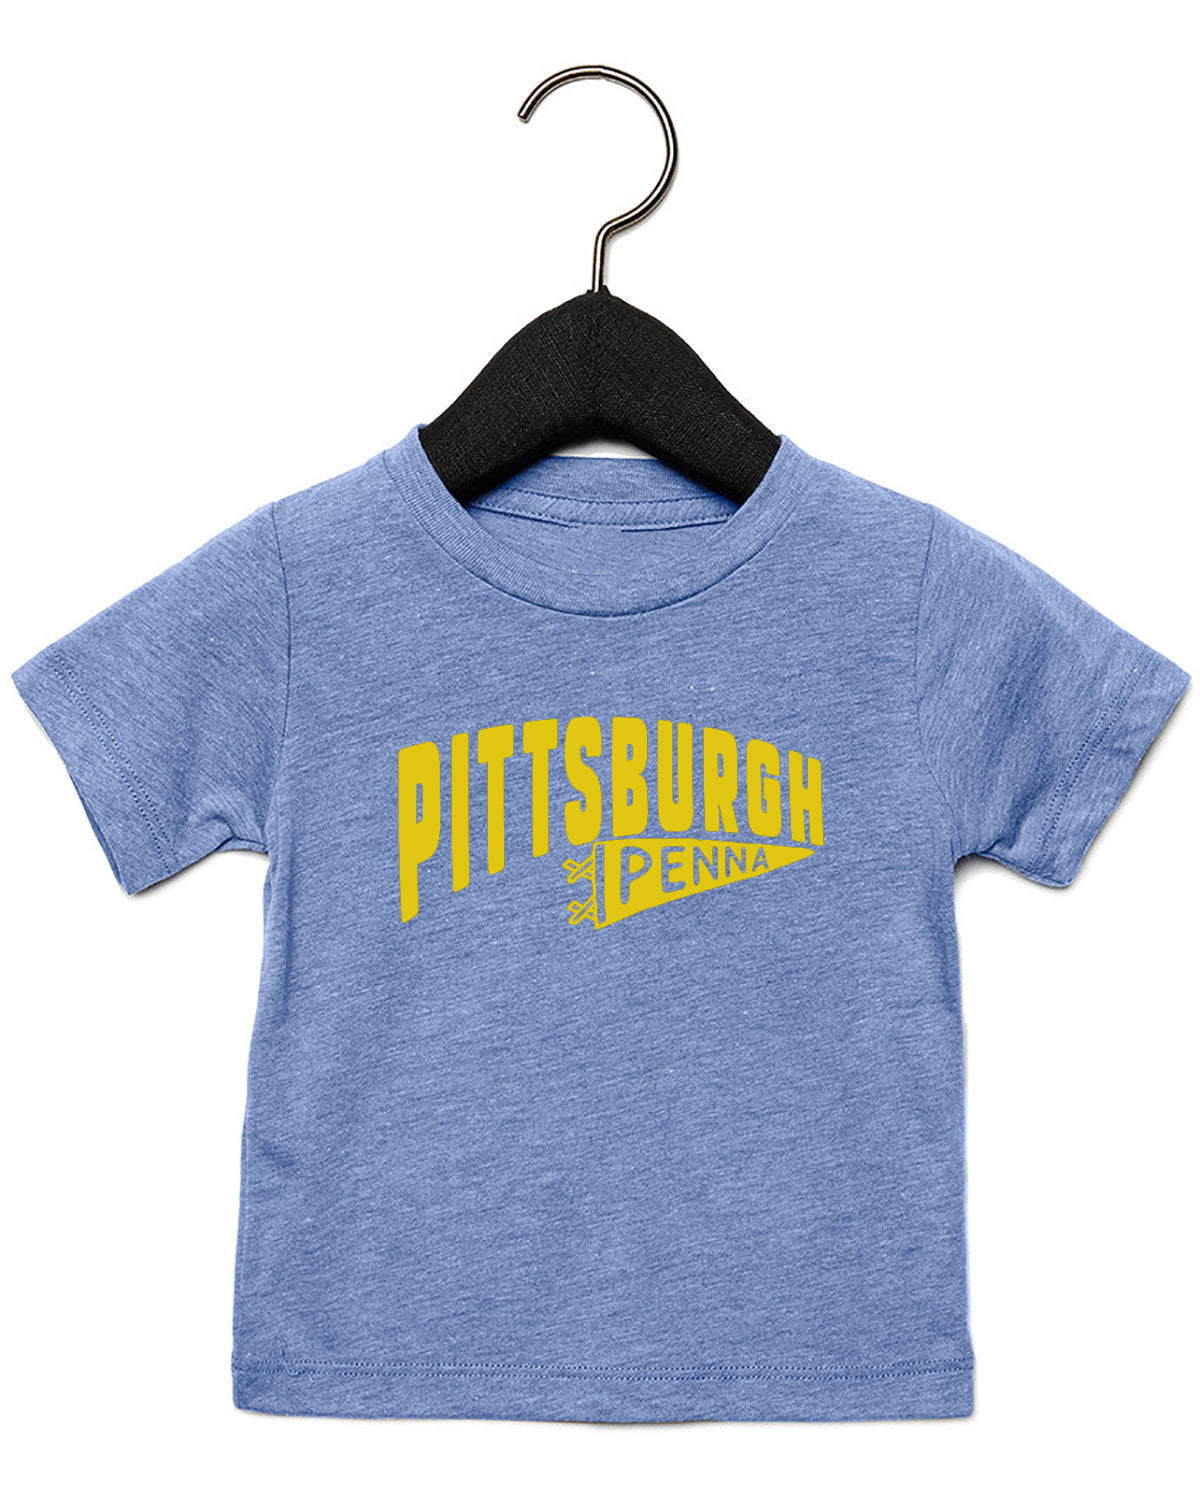 Infant/Toddler Pittsburgh Penna Tee